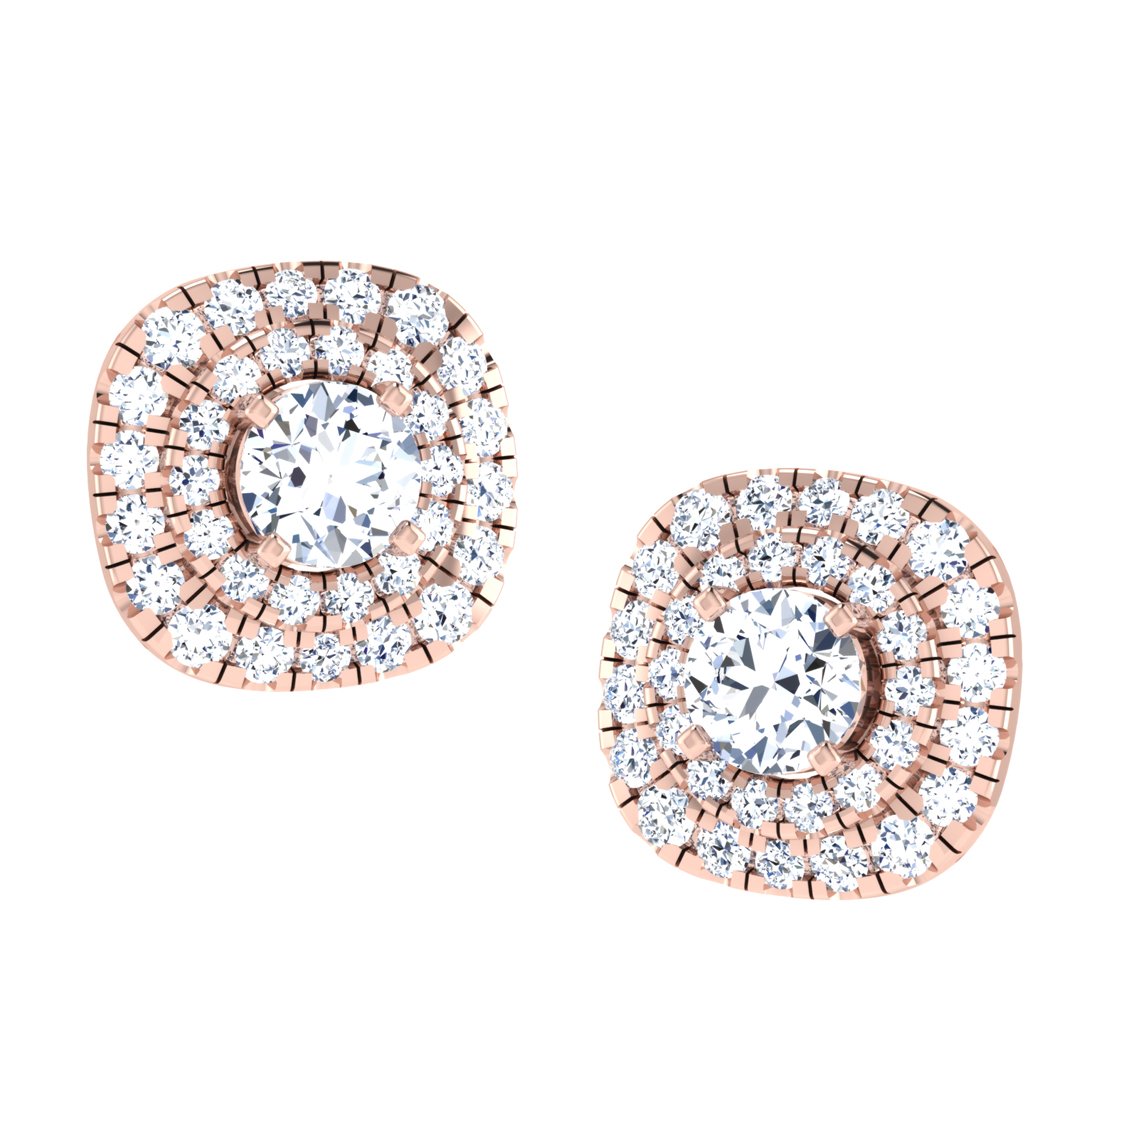 Squarish Round Diamond Earring In Pure Gold By Dhanji Jewels